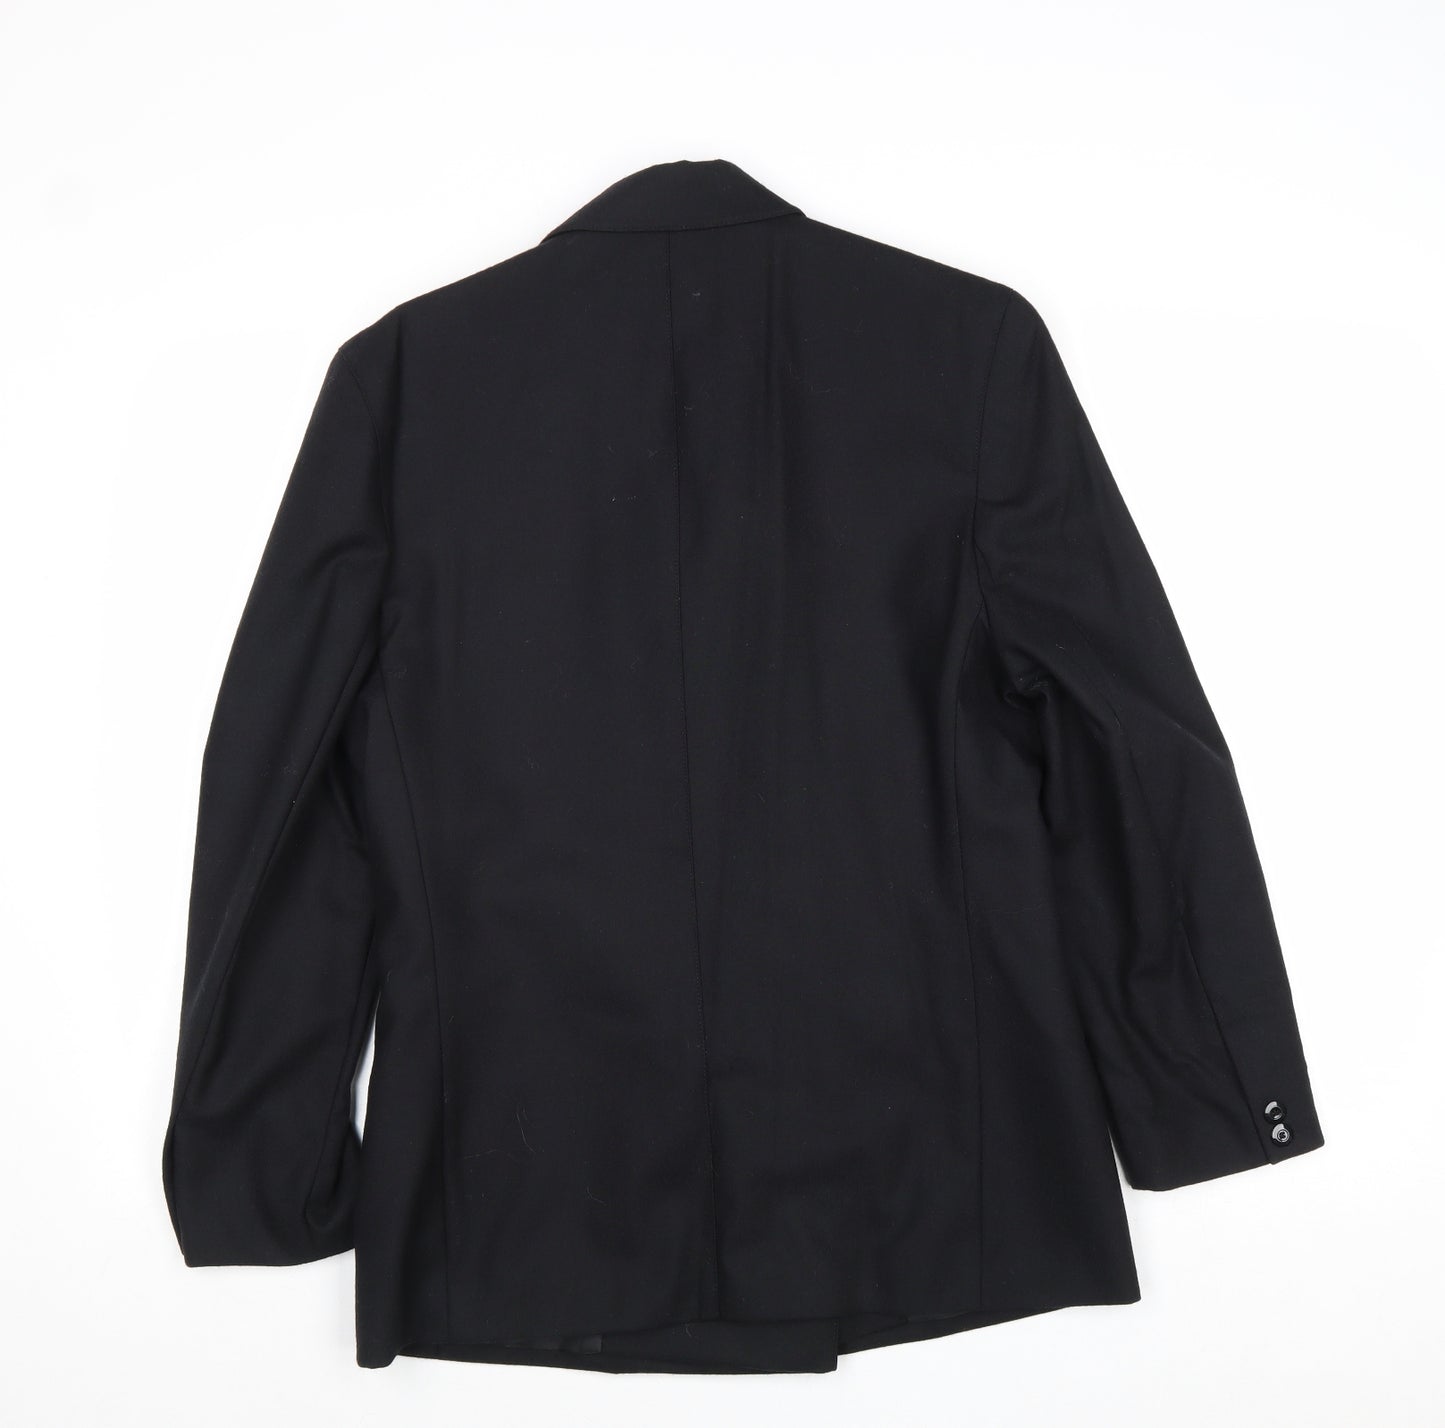 Marks and Spencer Womens Black Wool Jacket Suit Jacket Size 10